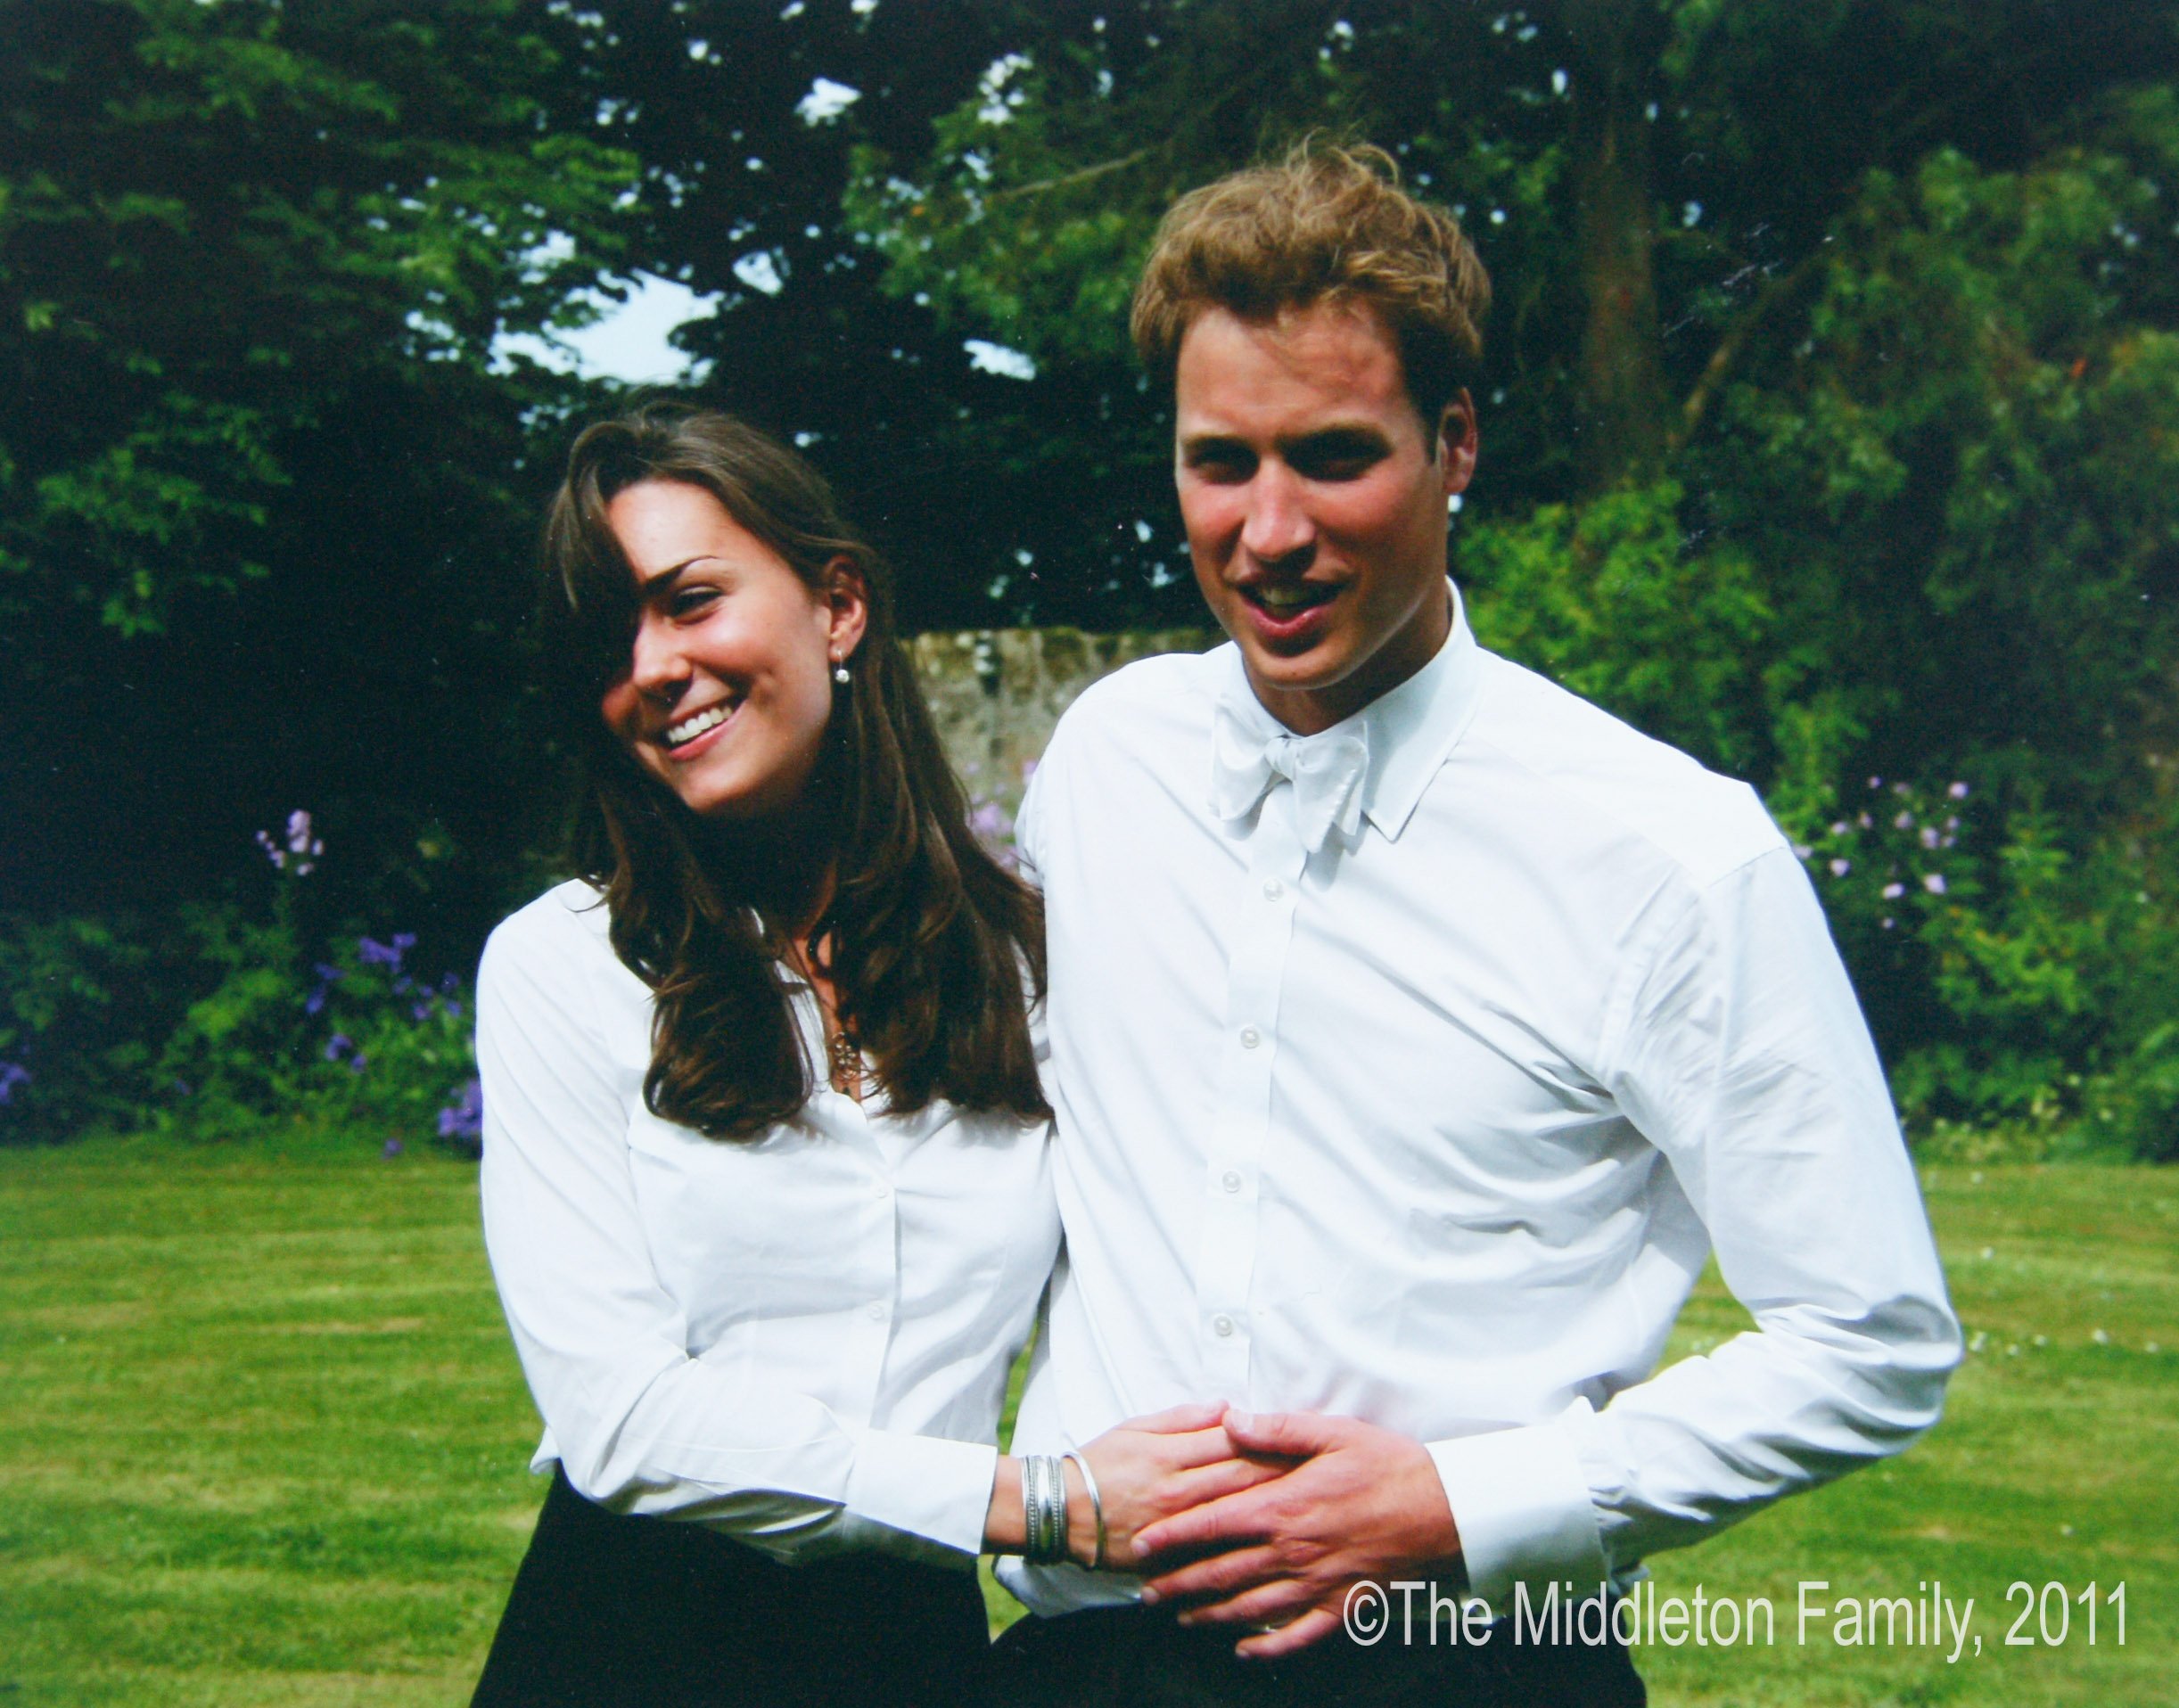 Kate Middleton and Prince William on their graduation day at St Andrew's University on June 23, 2005 | Source: Getty Images